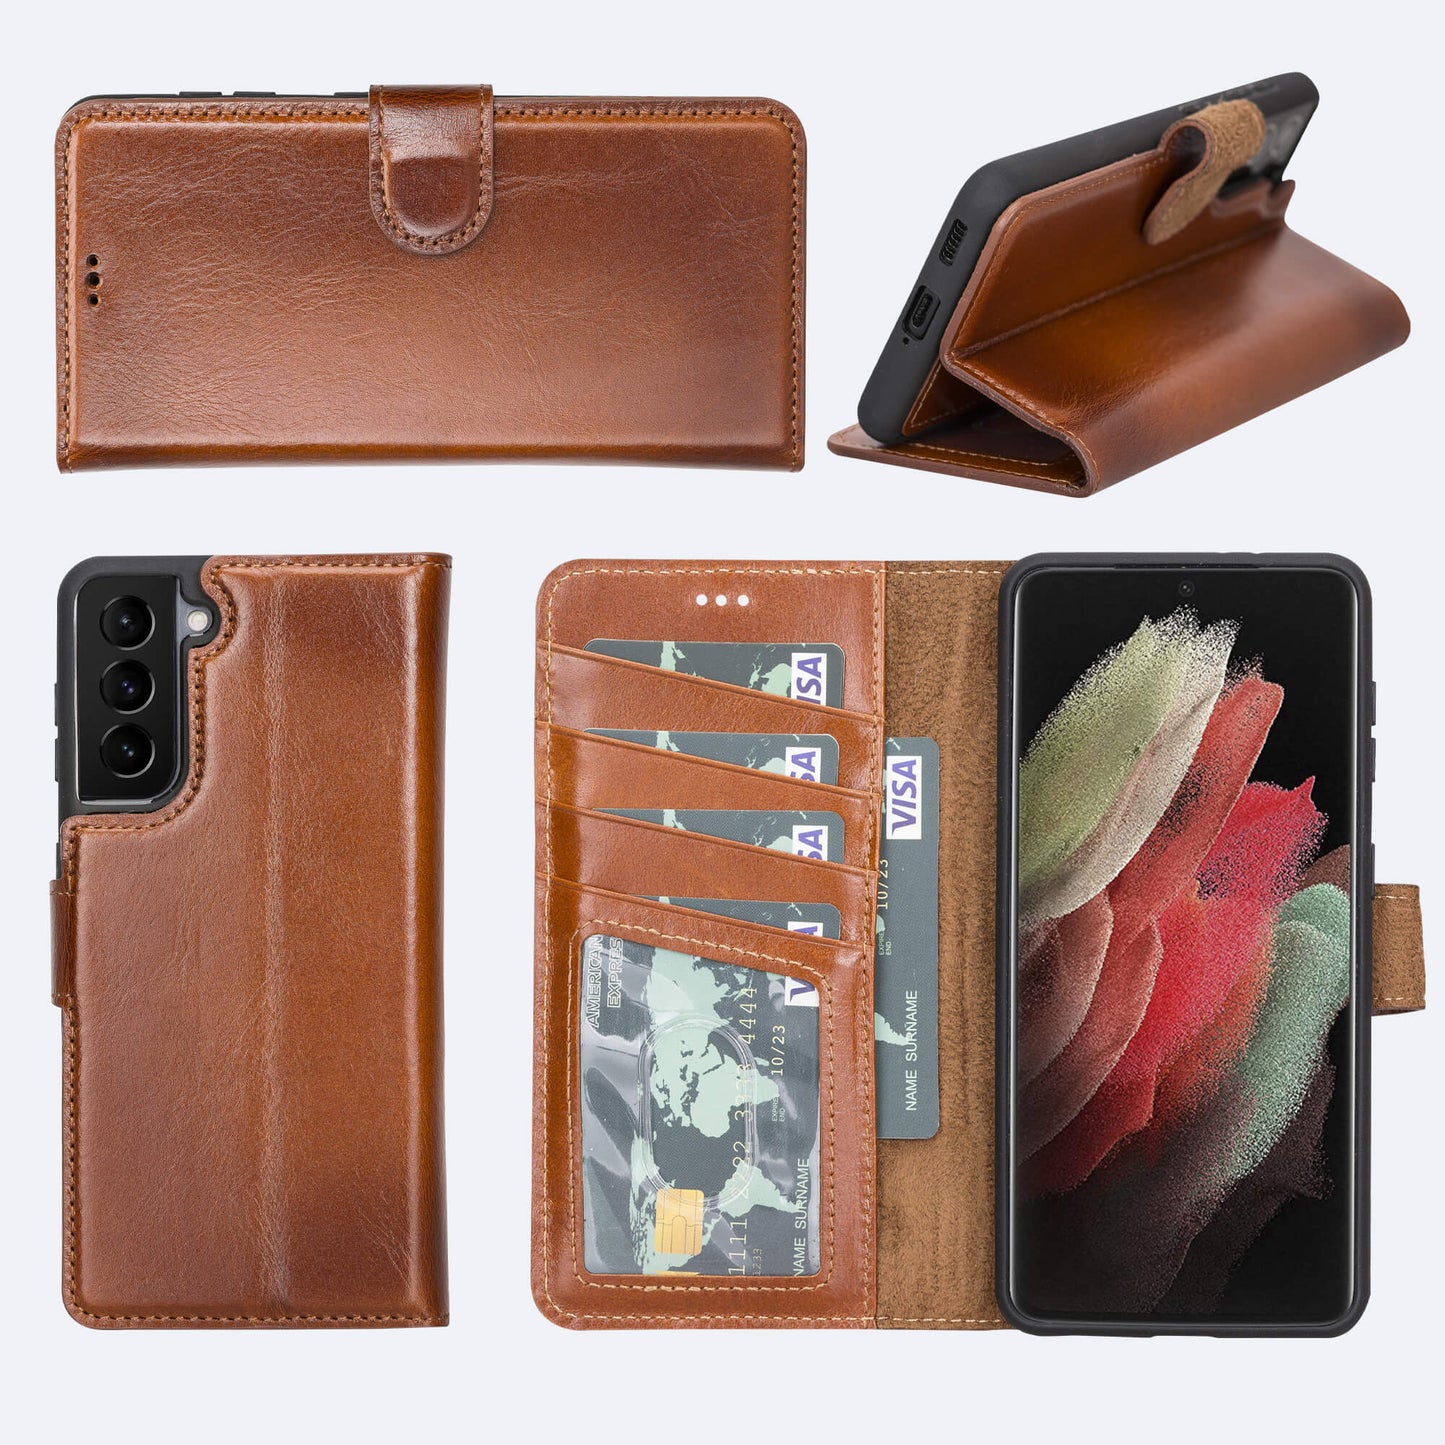 Samsung Galaxy S21 Leather Wallet Case